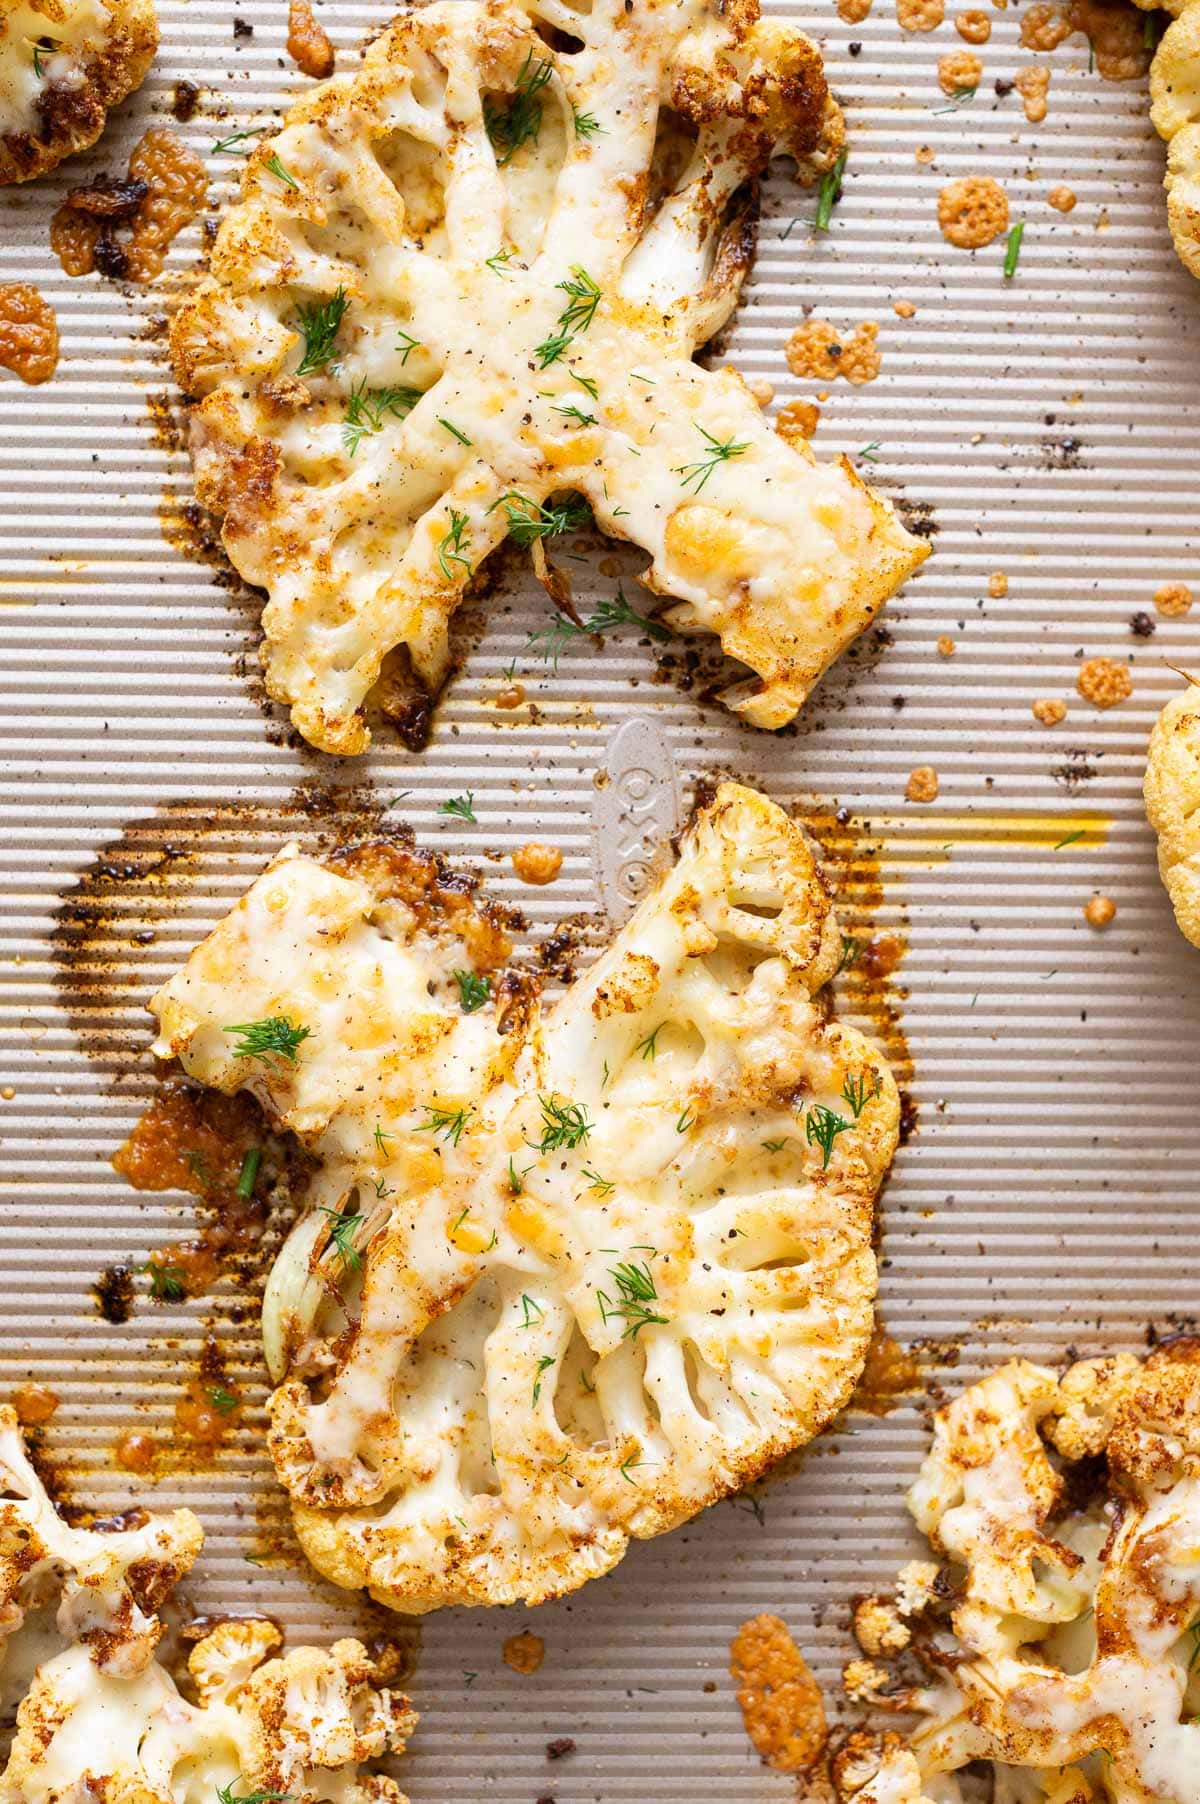 Cheesy cauliflower steaks with burnt cheese edges on a baking sheet.